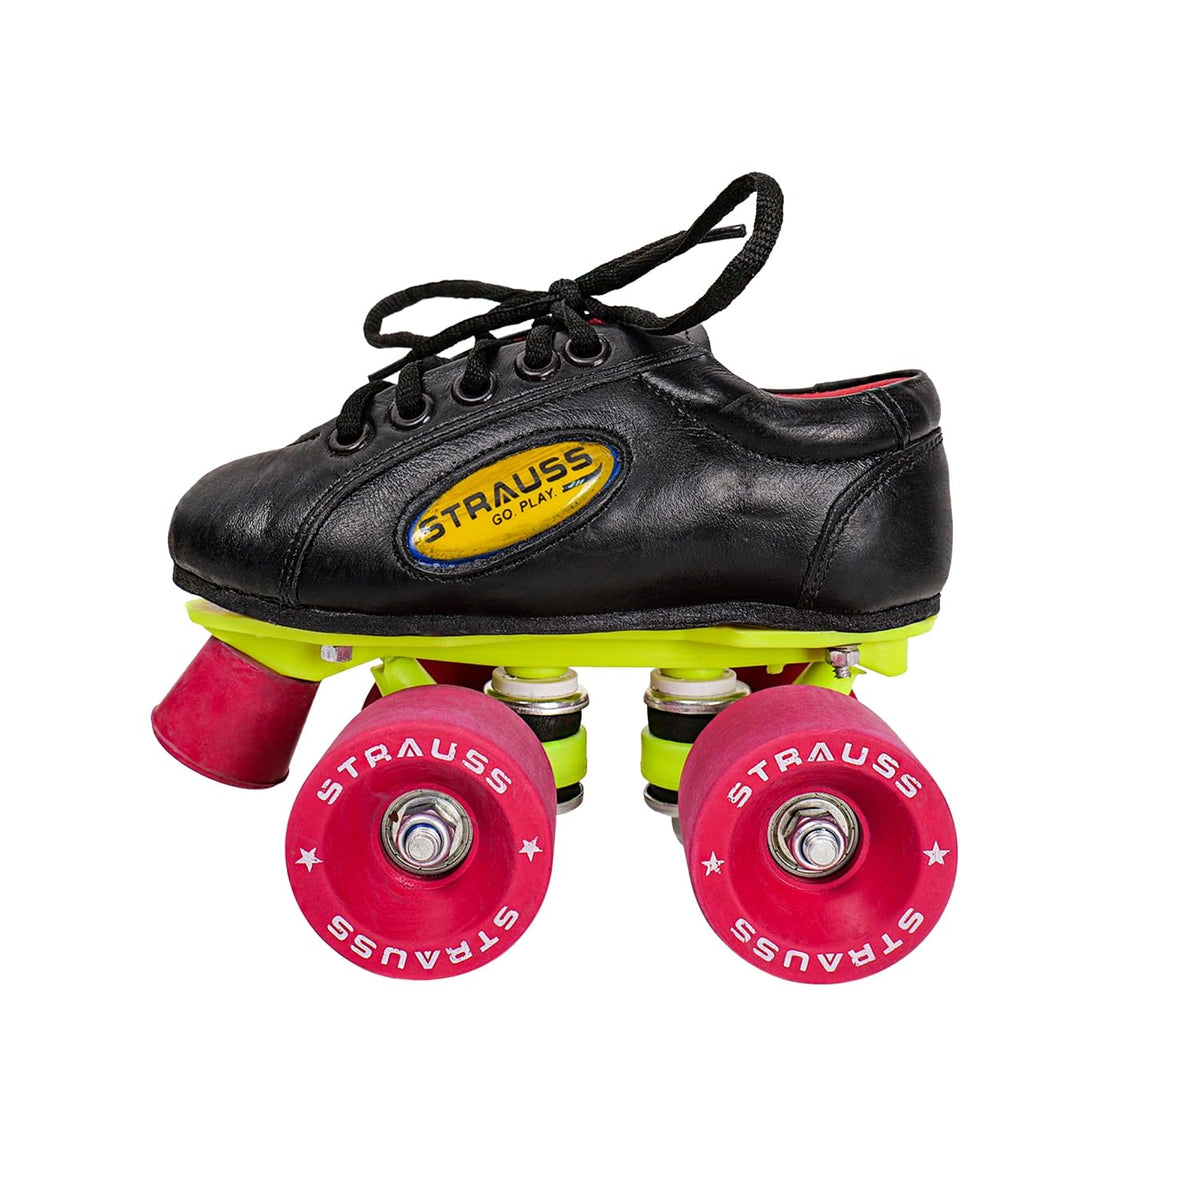 STRAUSS Gripper Skating Shoes | Fixed Body Roller Skates | Shoe Skate with Rubber Wheel |Ideal for Boys, Girls and Kids |Suitable for All Skill Level | Ideal for Kids (9-10 Years),Size-2, (Red/Black)